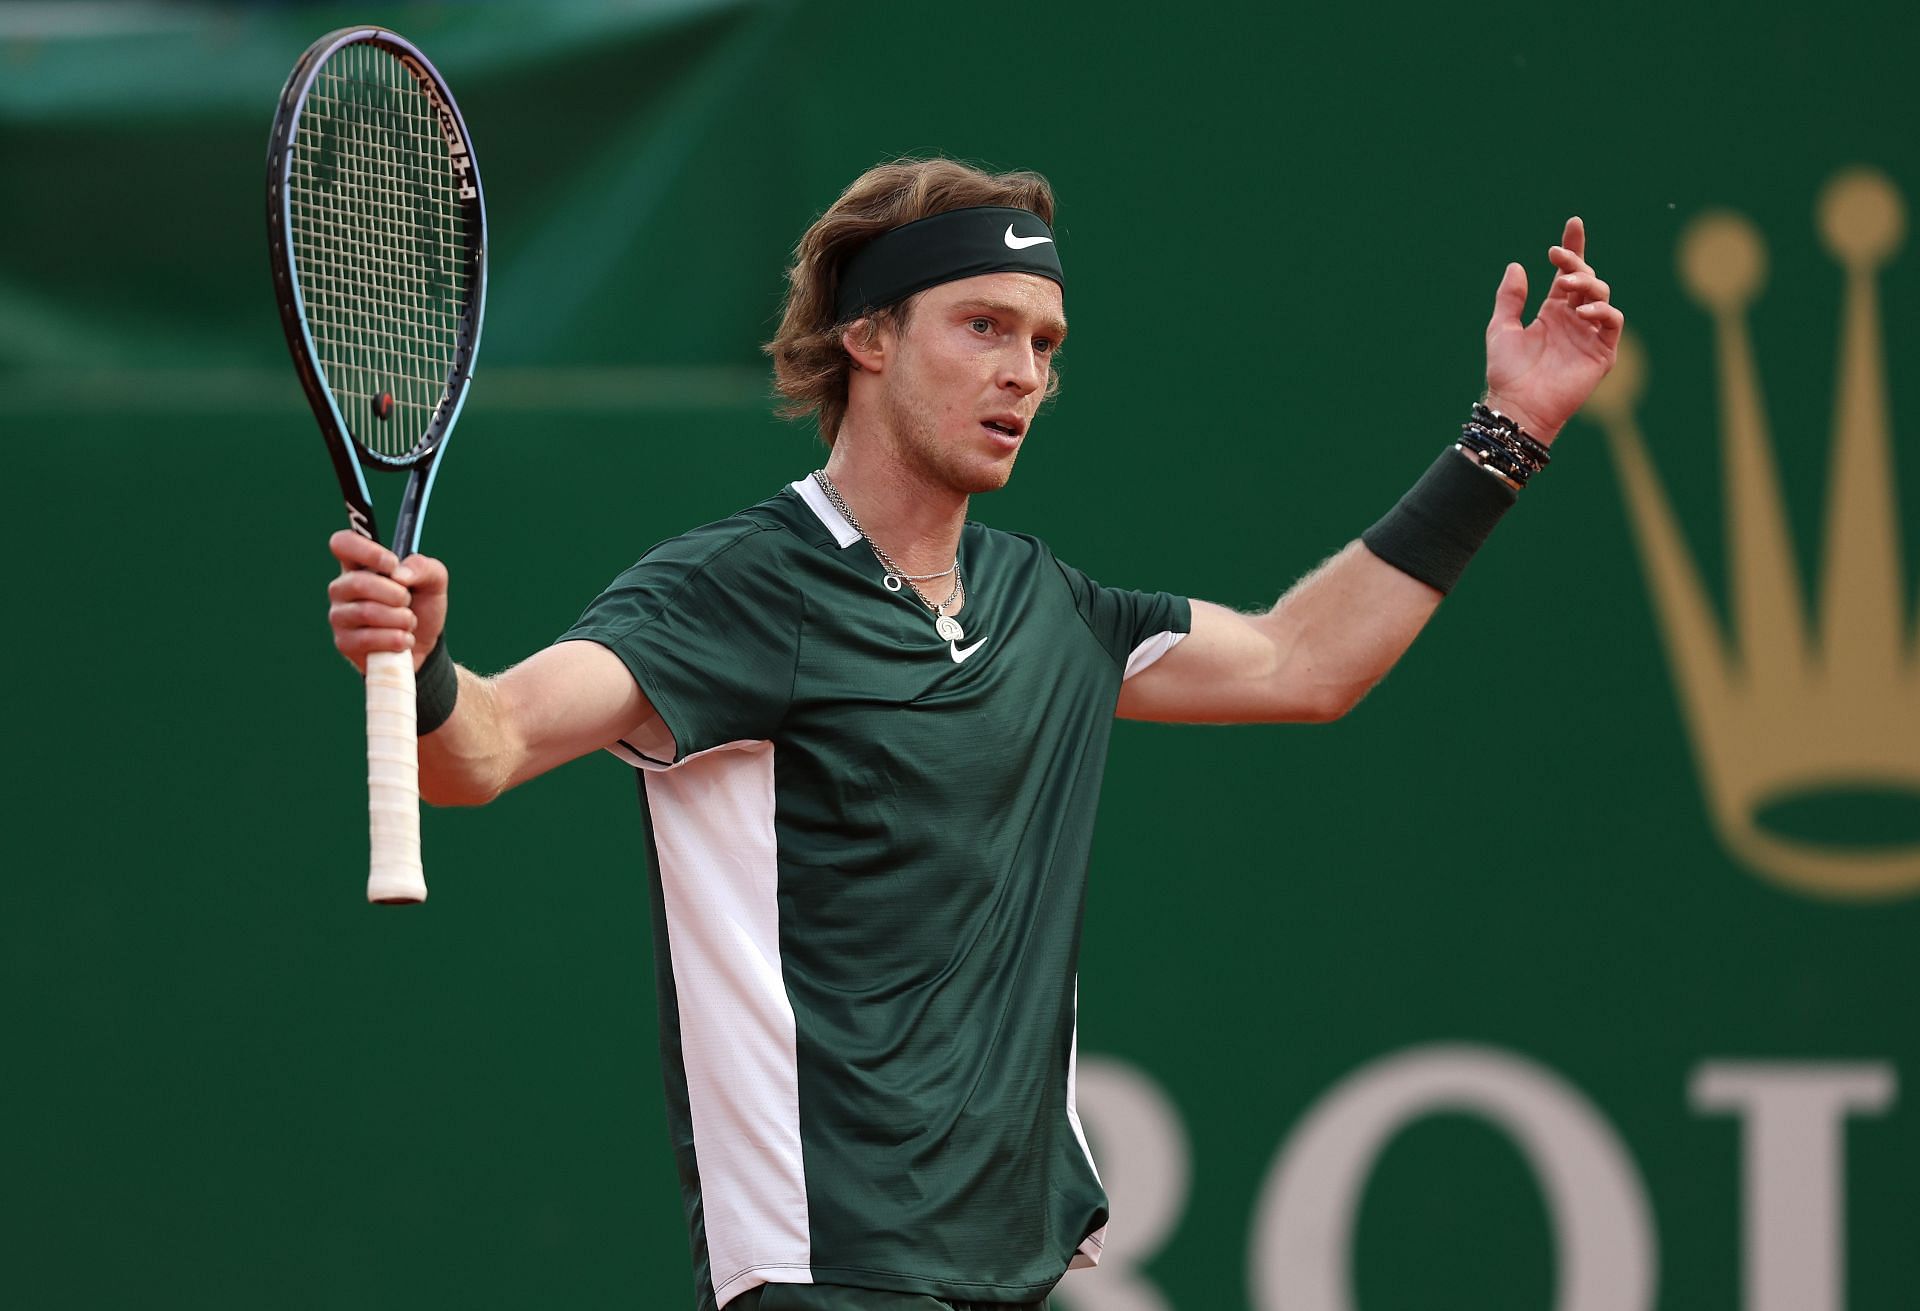 Andrey Rublev at the 2022 Rolex Monte-Carlo Masters.